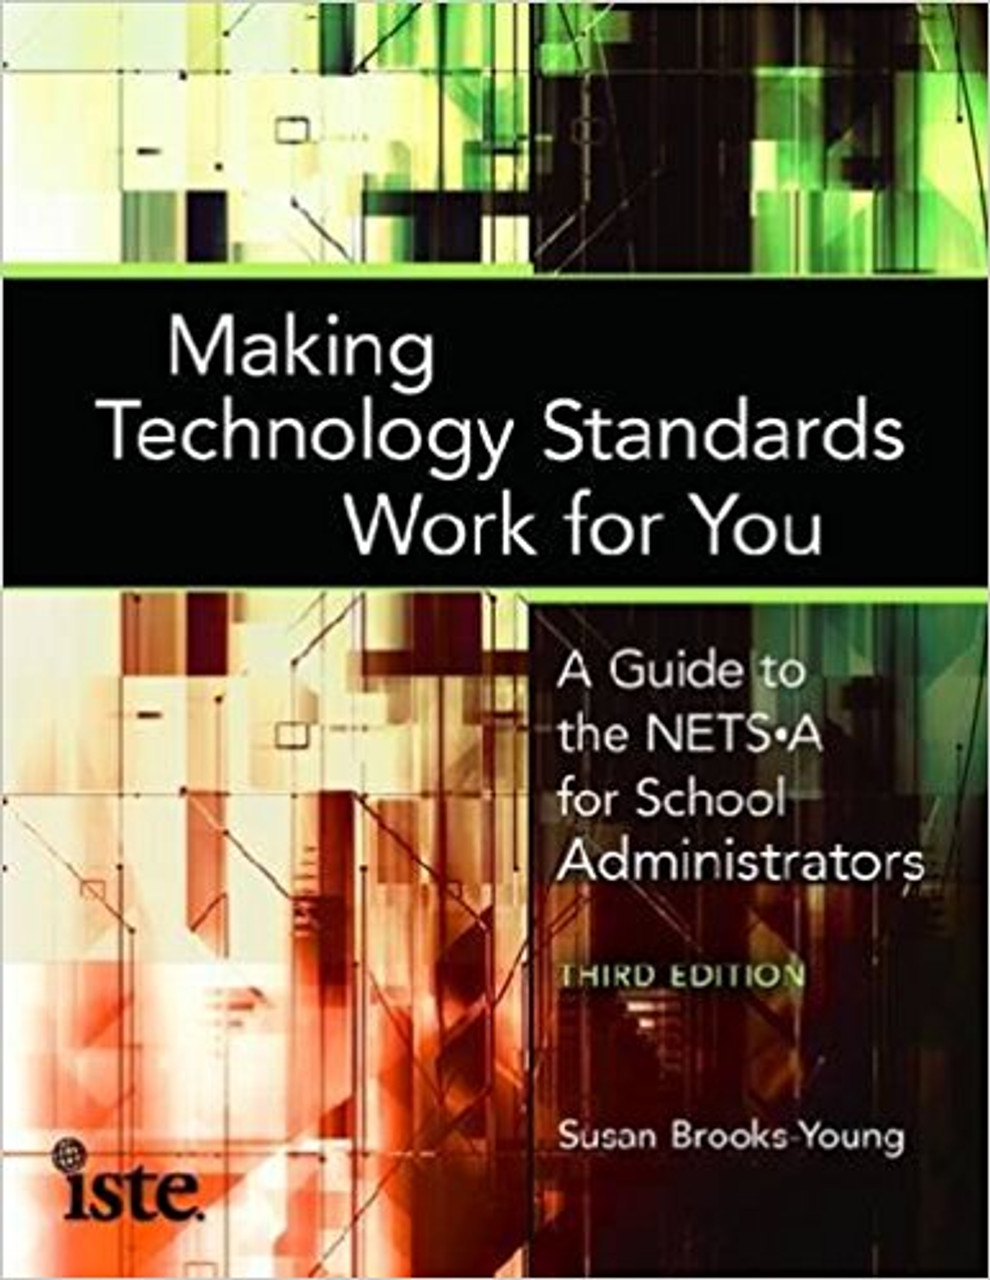 Making Technology Standards Work for You: A Guide to the NETS-A for School Administrators by Susan Brooks-Young